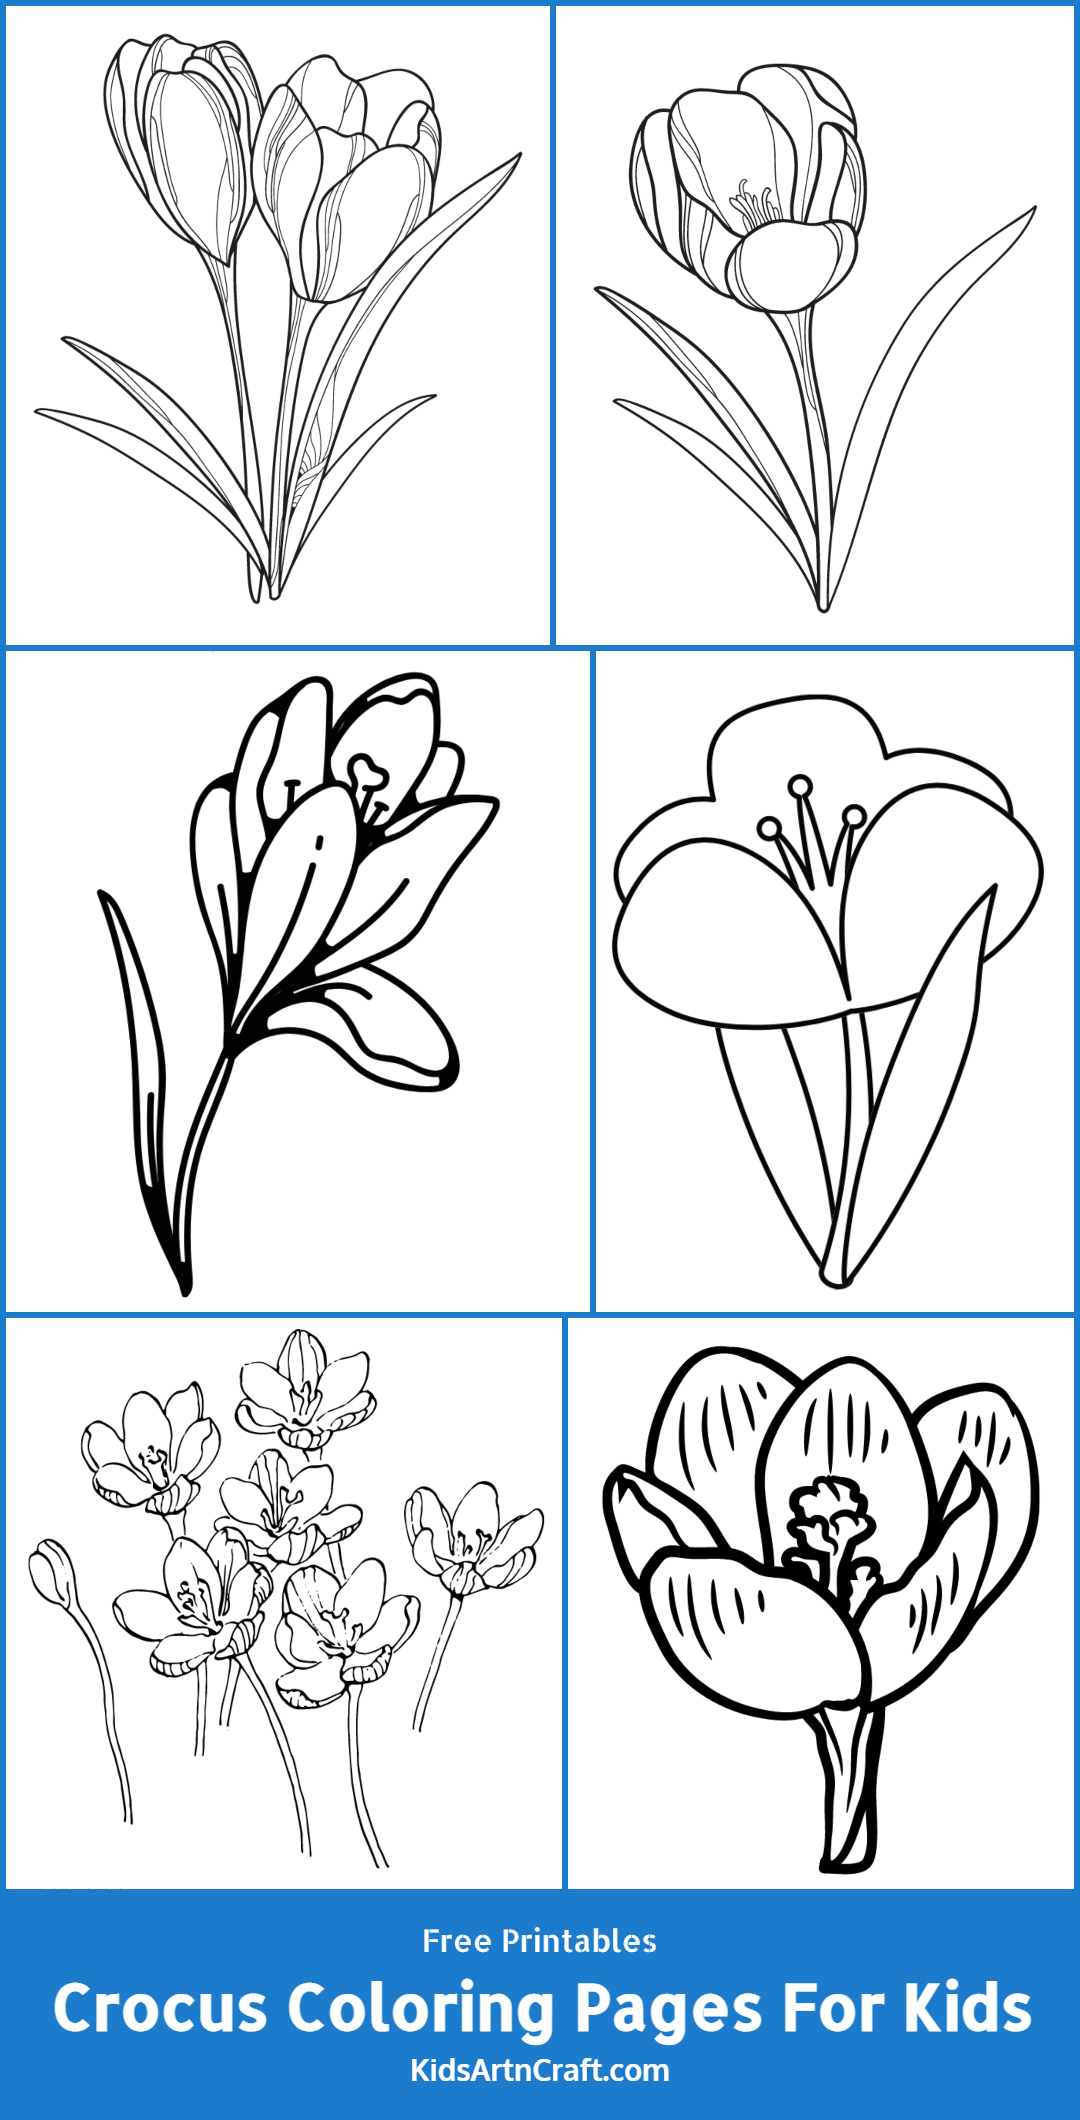 Crocus Coloring Pages For Kids – Free Printables